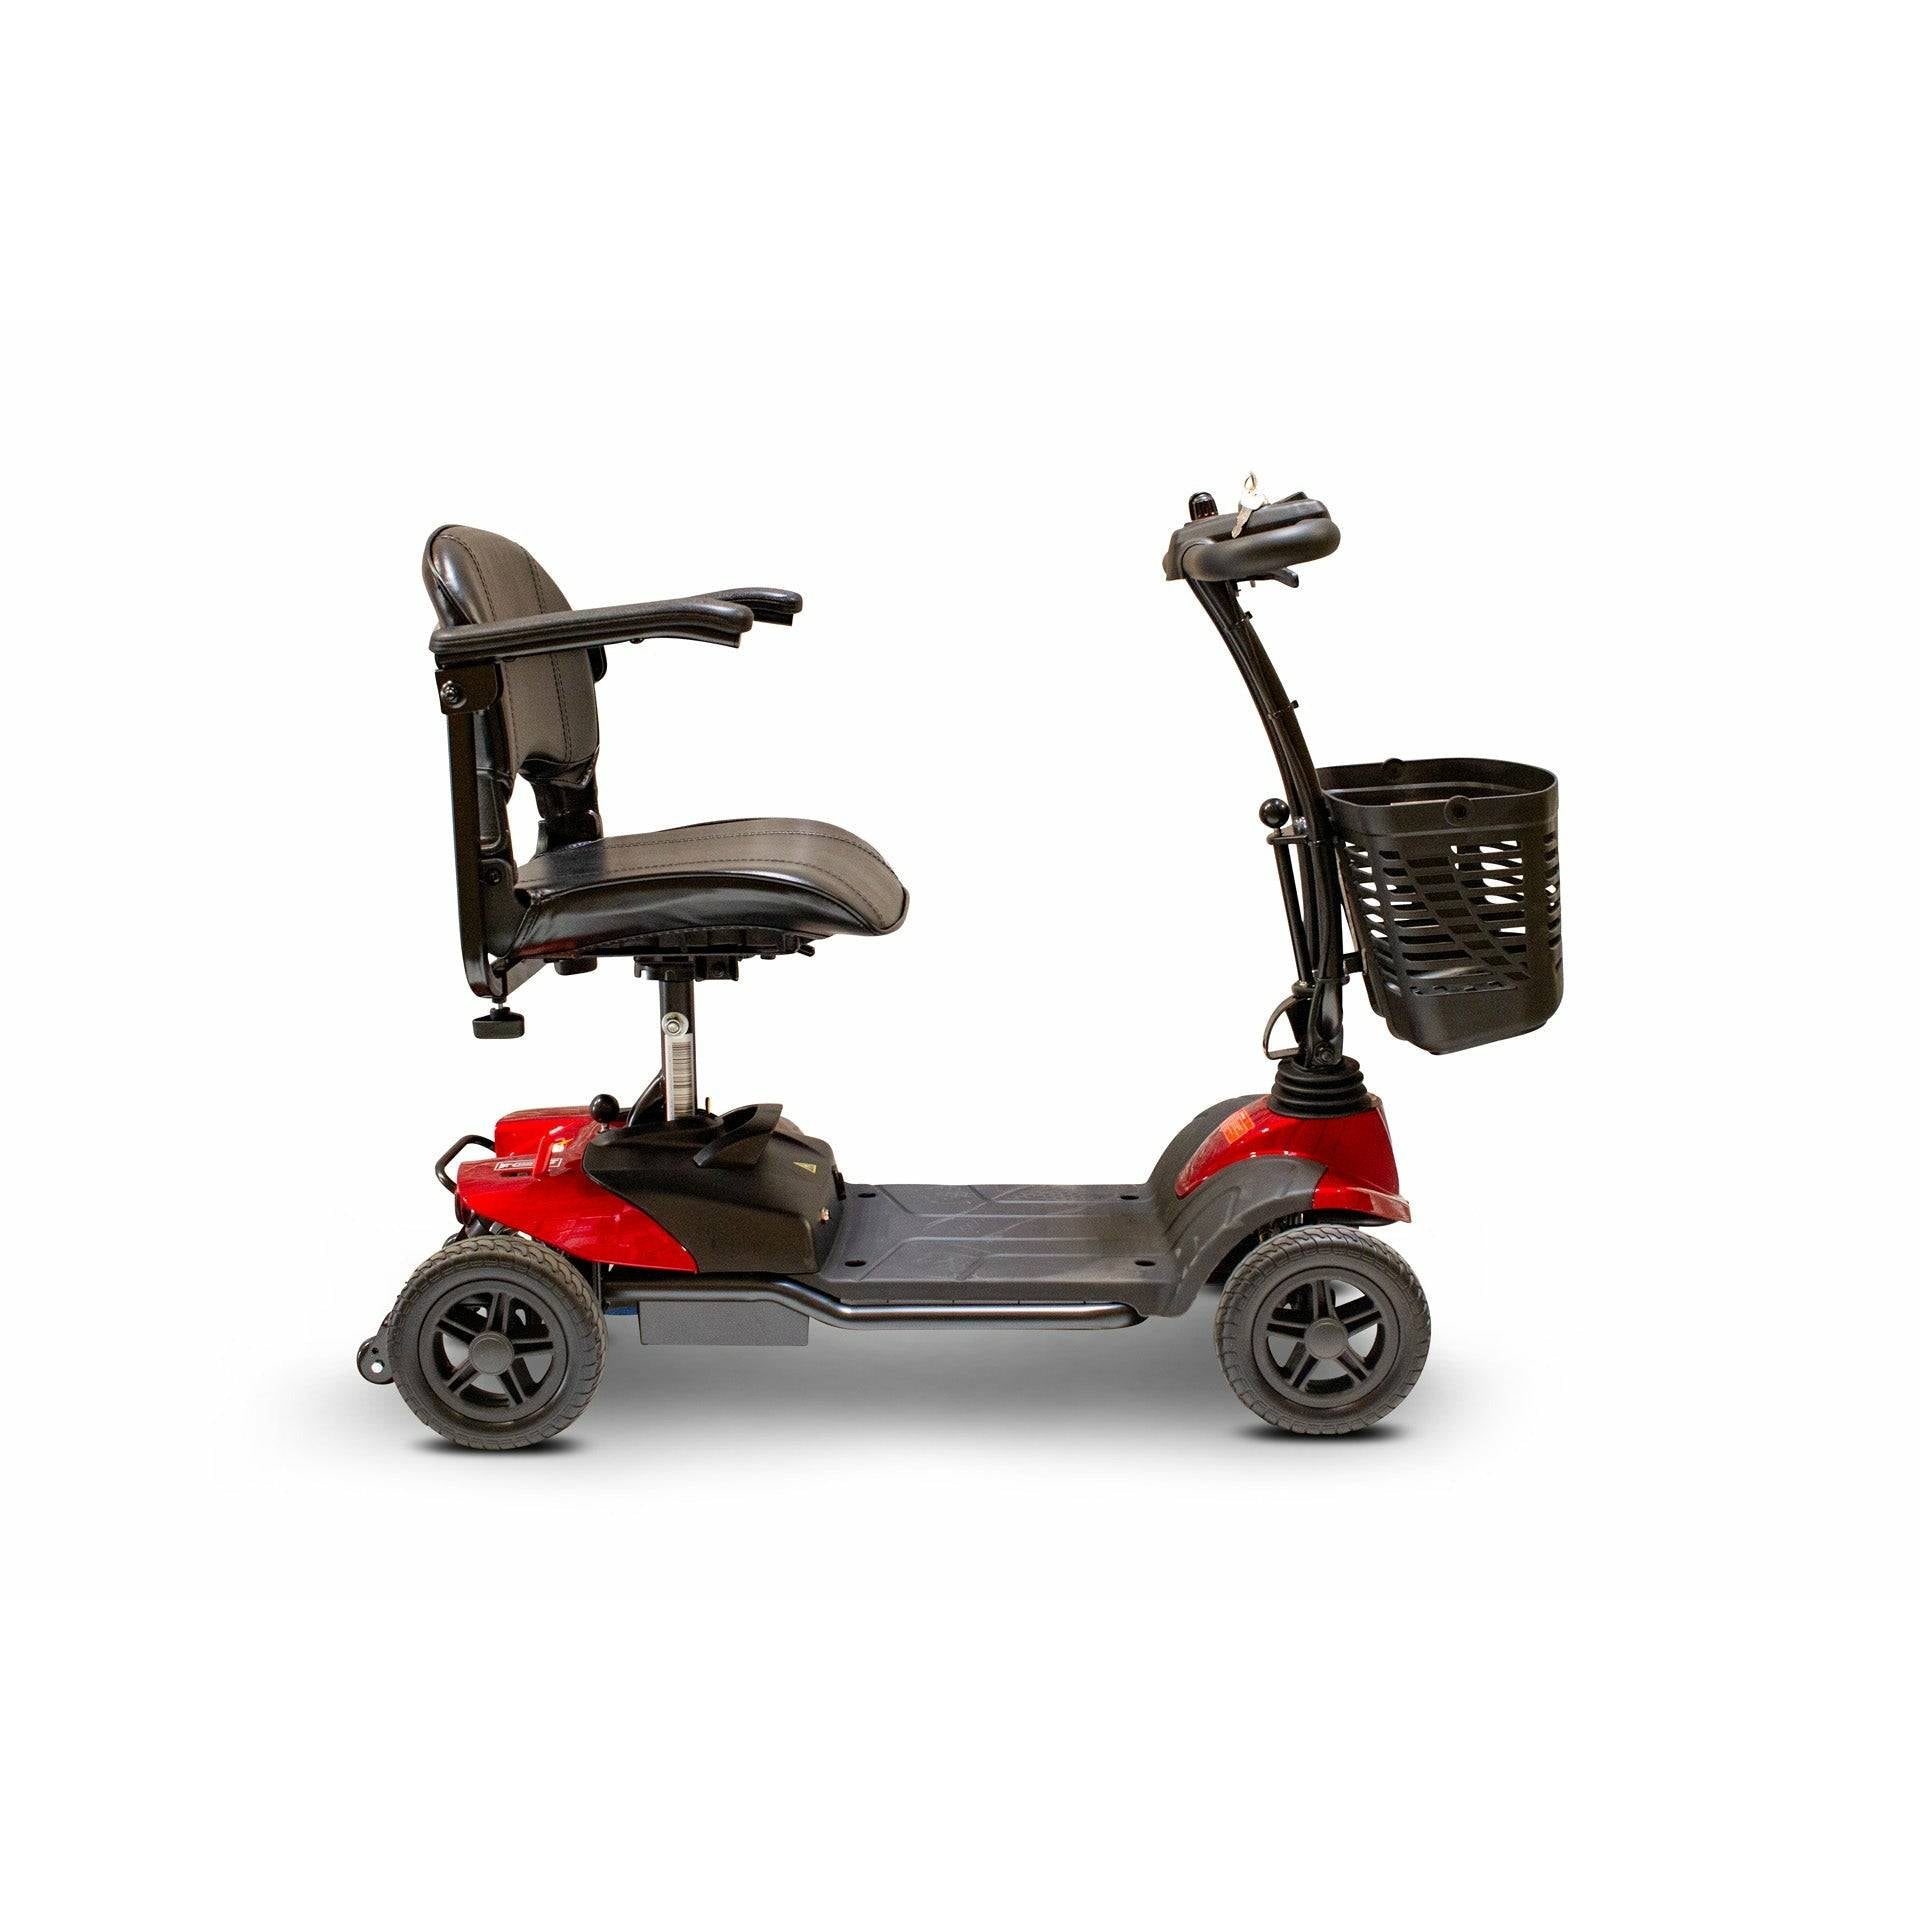 EWheels EW-M35 Travel Mobility Scooter Side Viewin Red